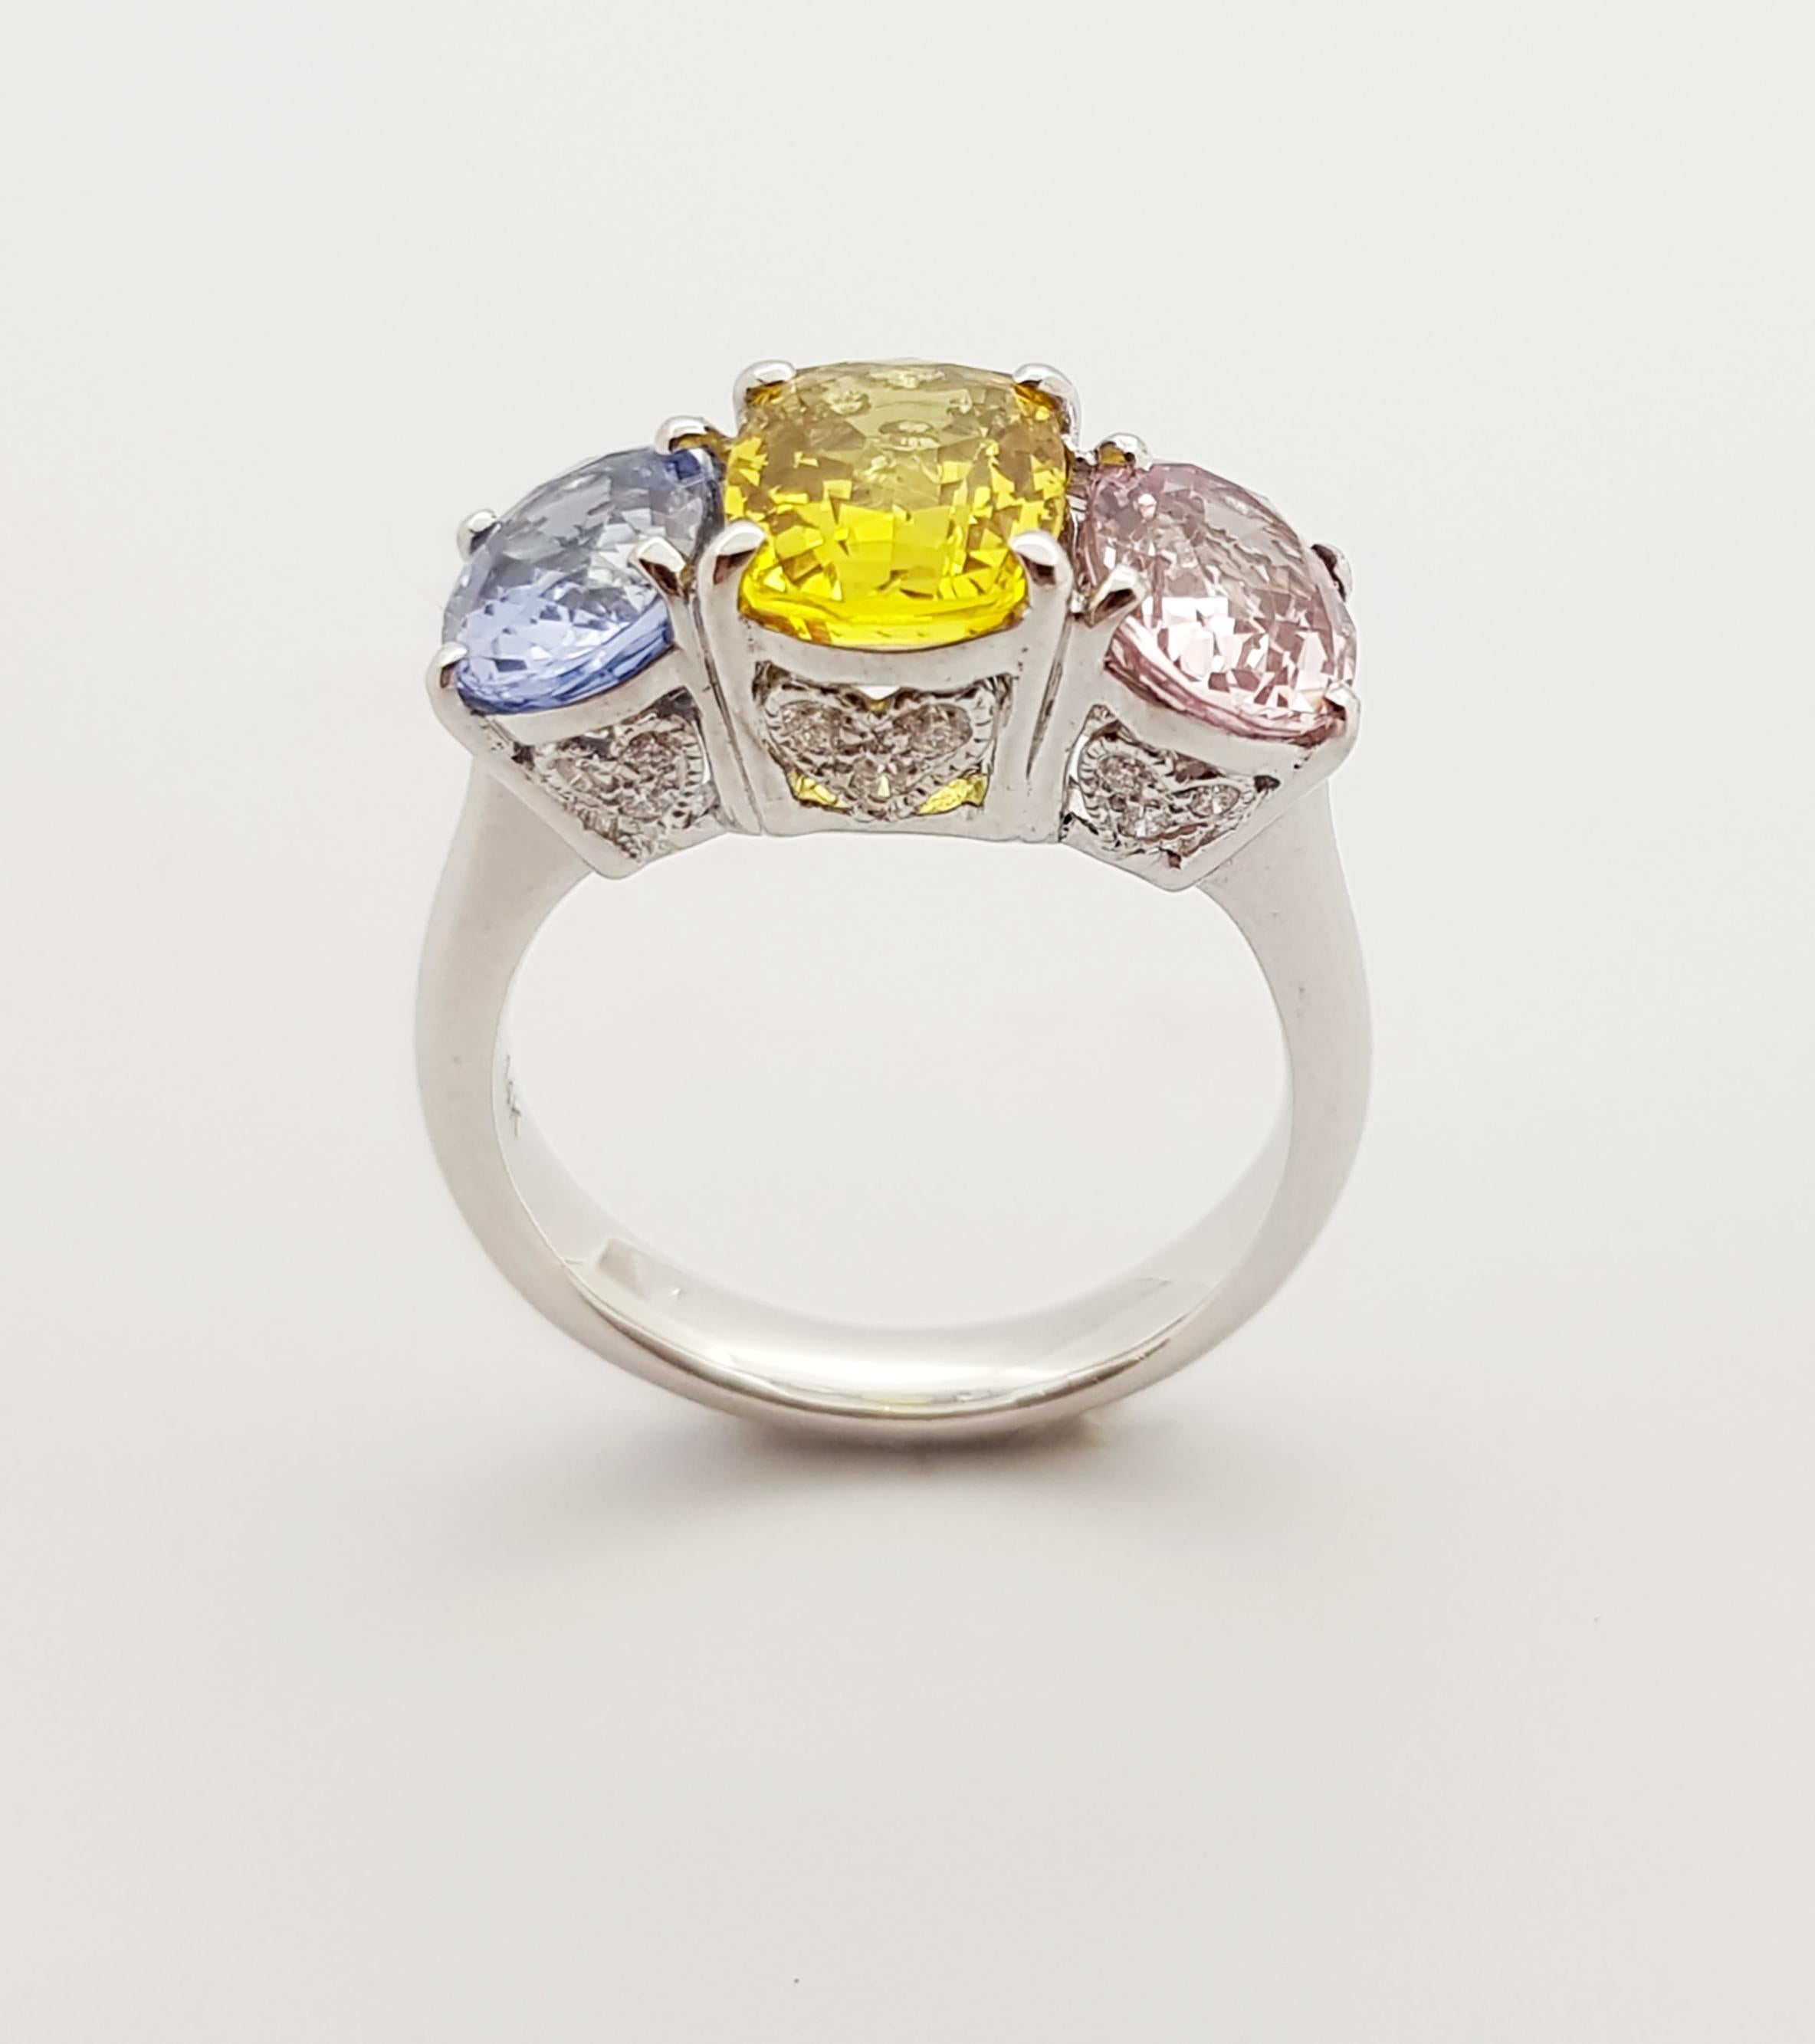 Pink Sapphire 1.99 carats, Yellow Sapphire 2.70 carats, Blue Sapphire 1.77 carats with Diamond 0.14 carat Ring set in 14 Karat White Gold Settings

Width:  1.9 cm 
Length: 0.8 cm
Ring Size: 55
Total Weight: 7.98 grams

